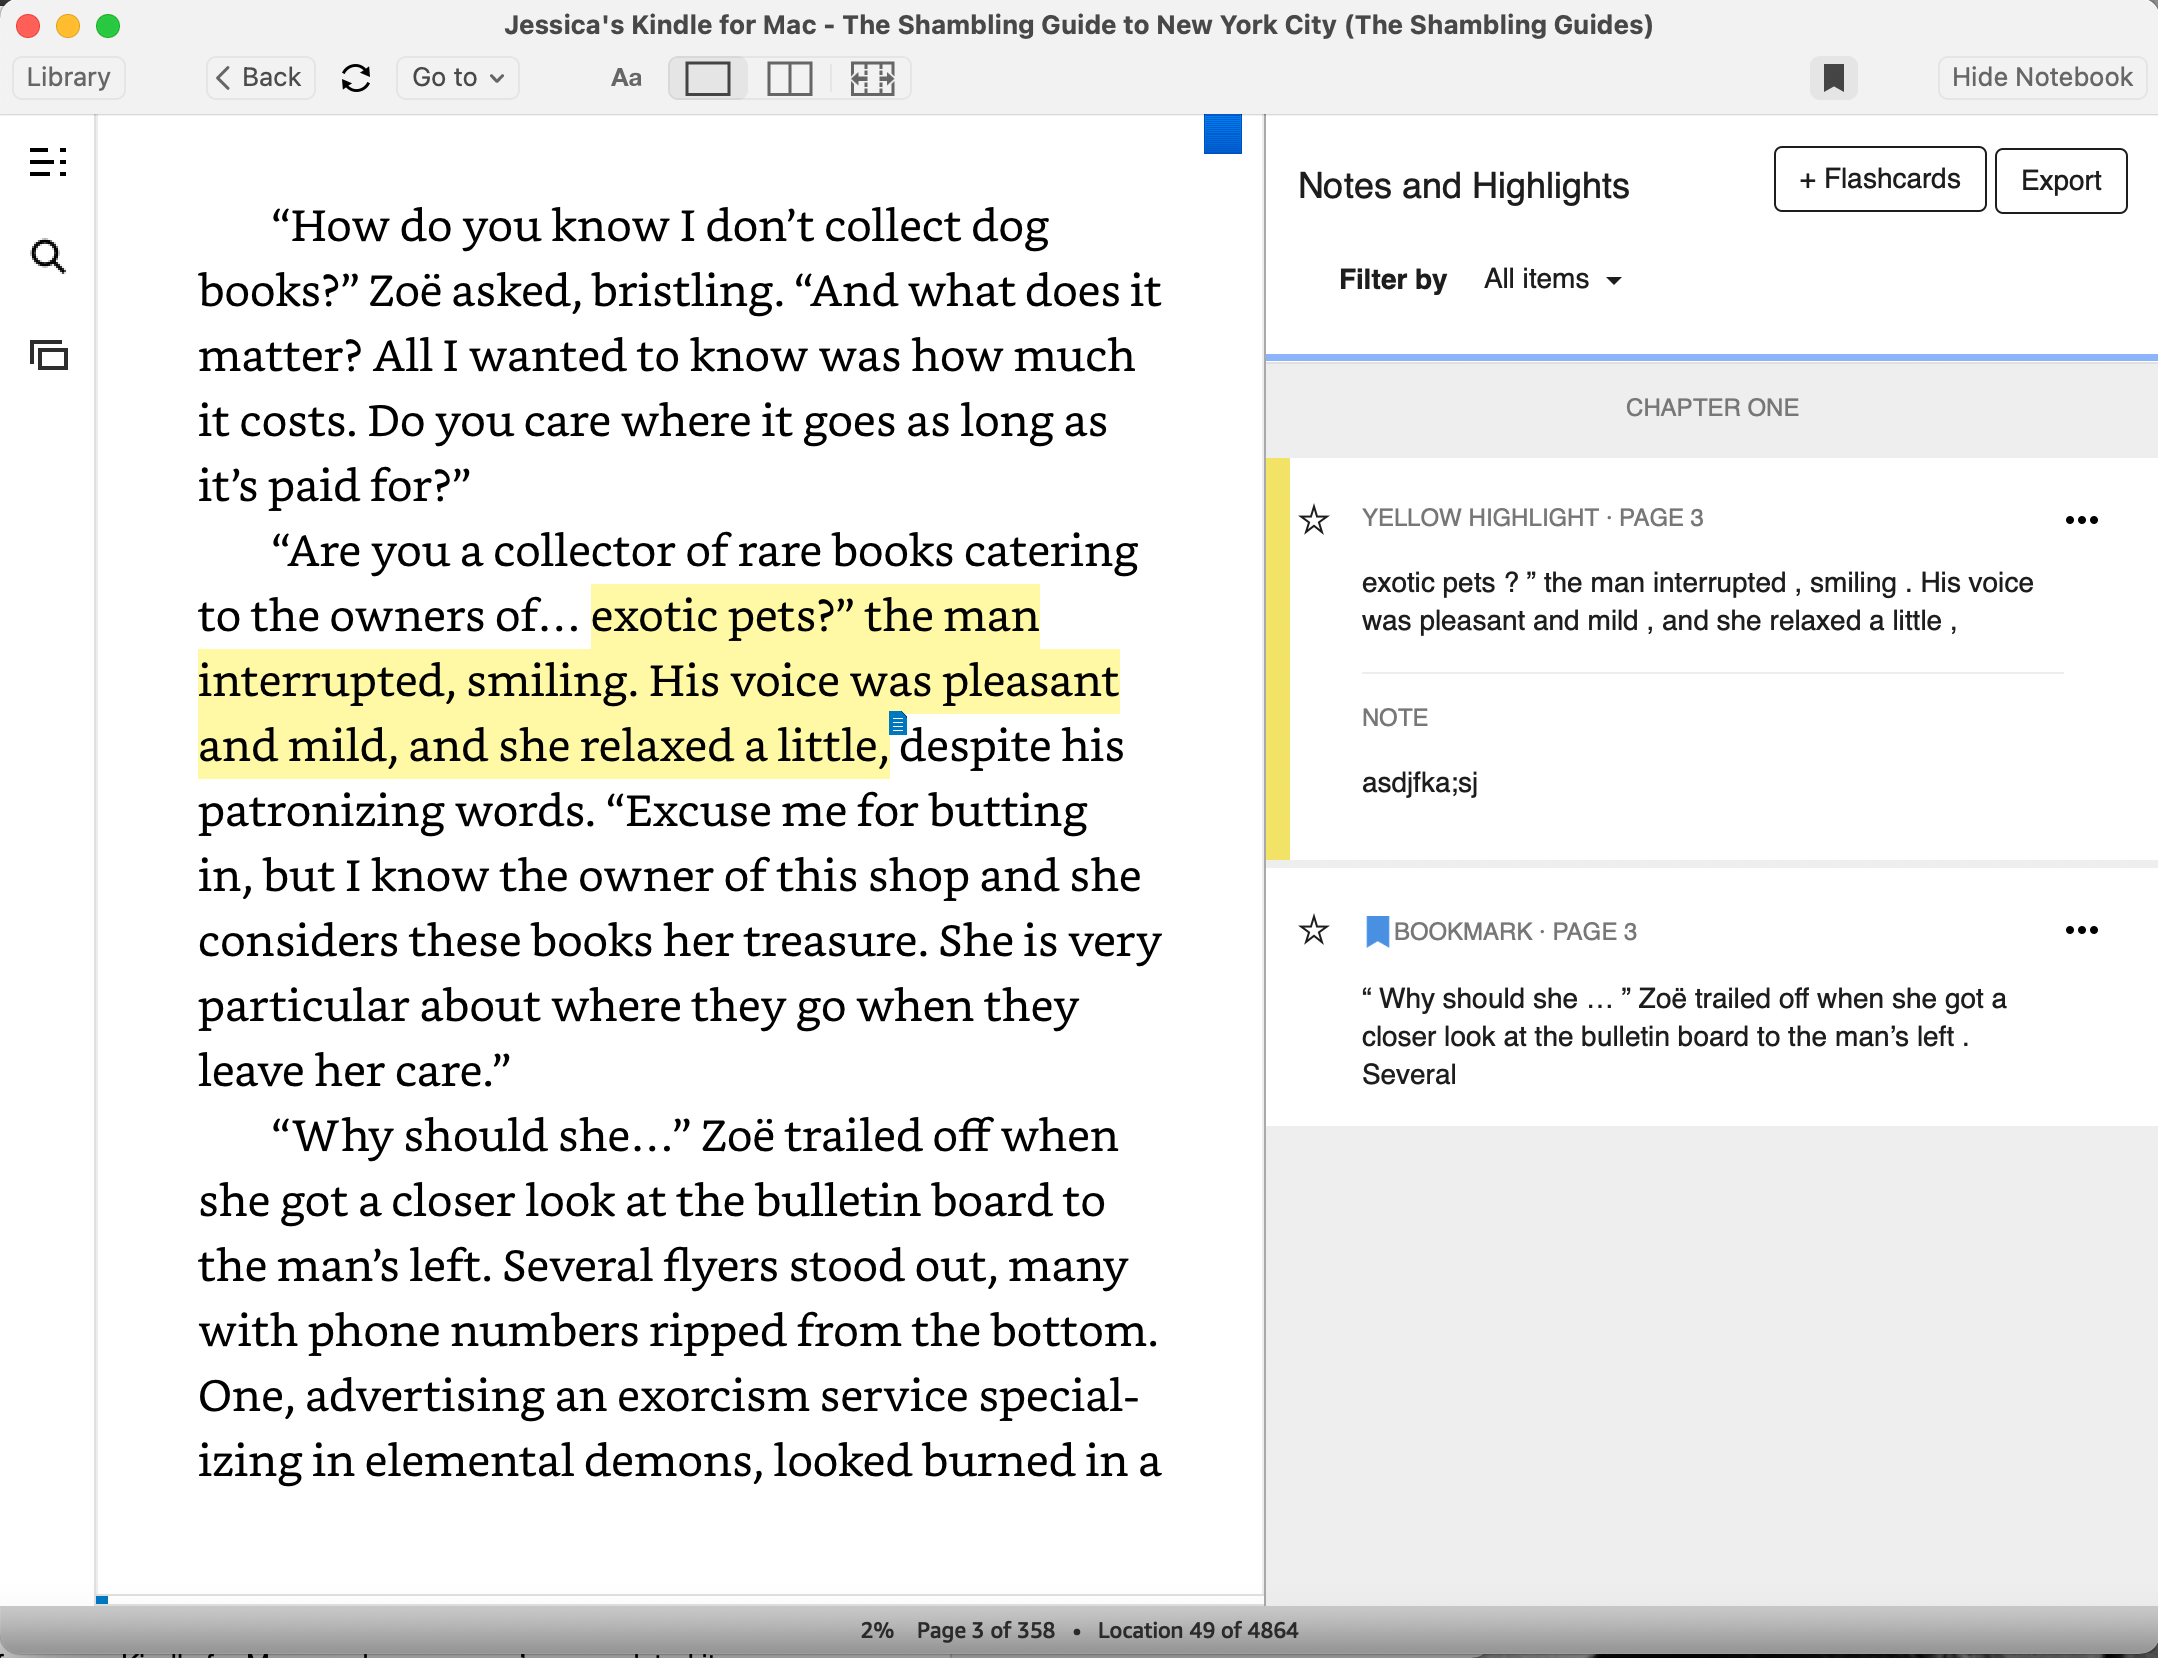 how to see highlights in kindle mac app